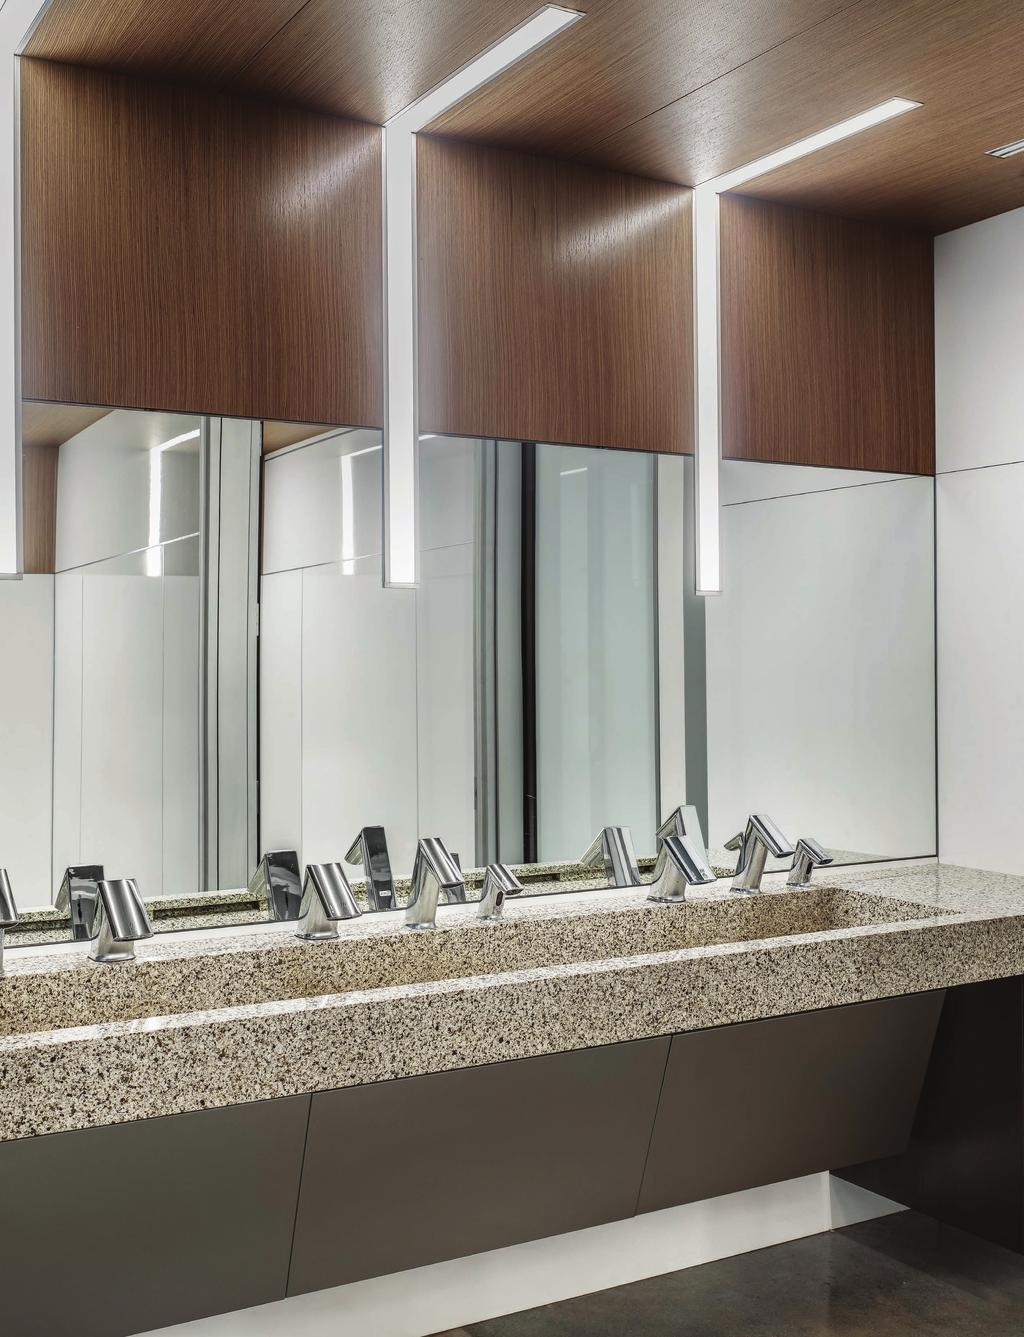 Eye-catching and game-changing Sinks are the most visible of the functional elements in a commercial restroom.